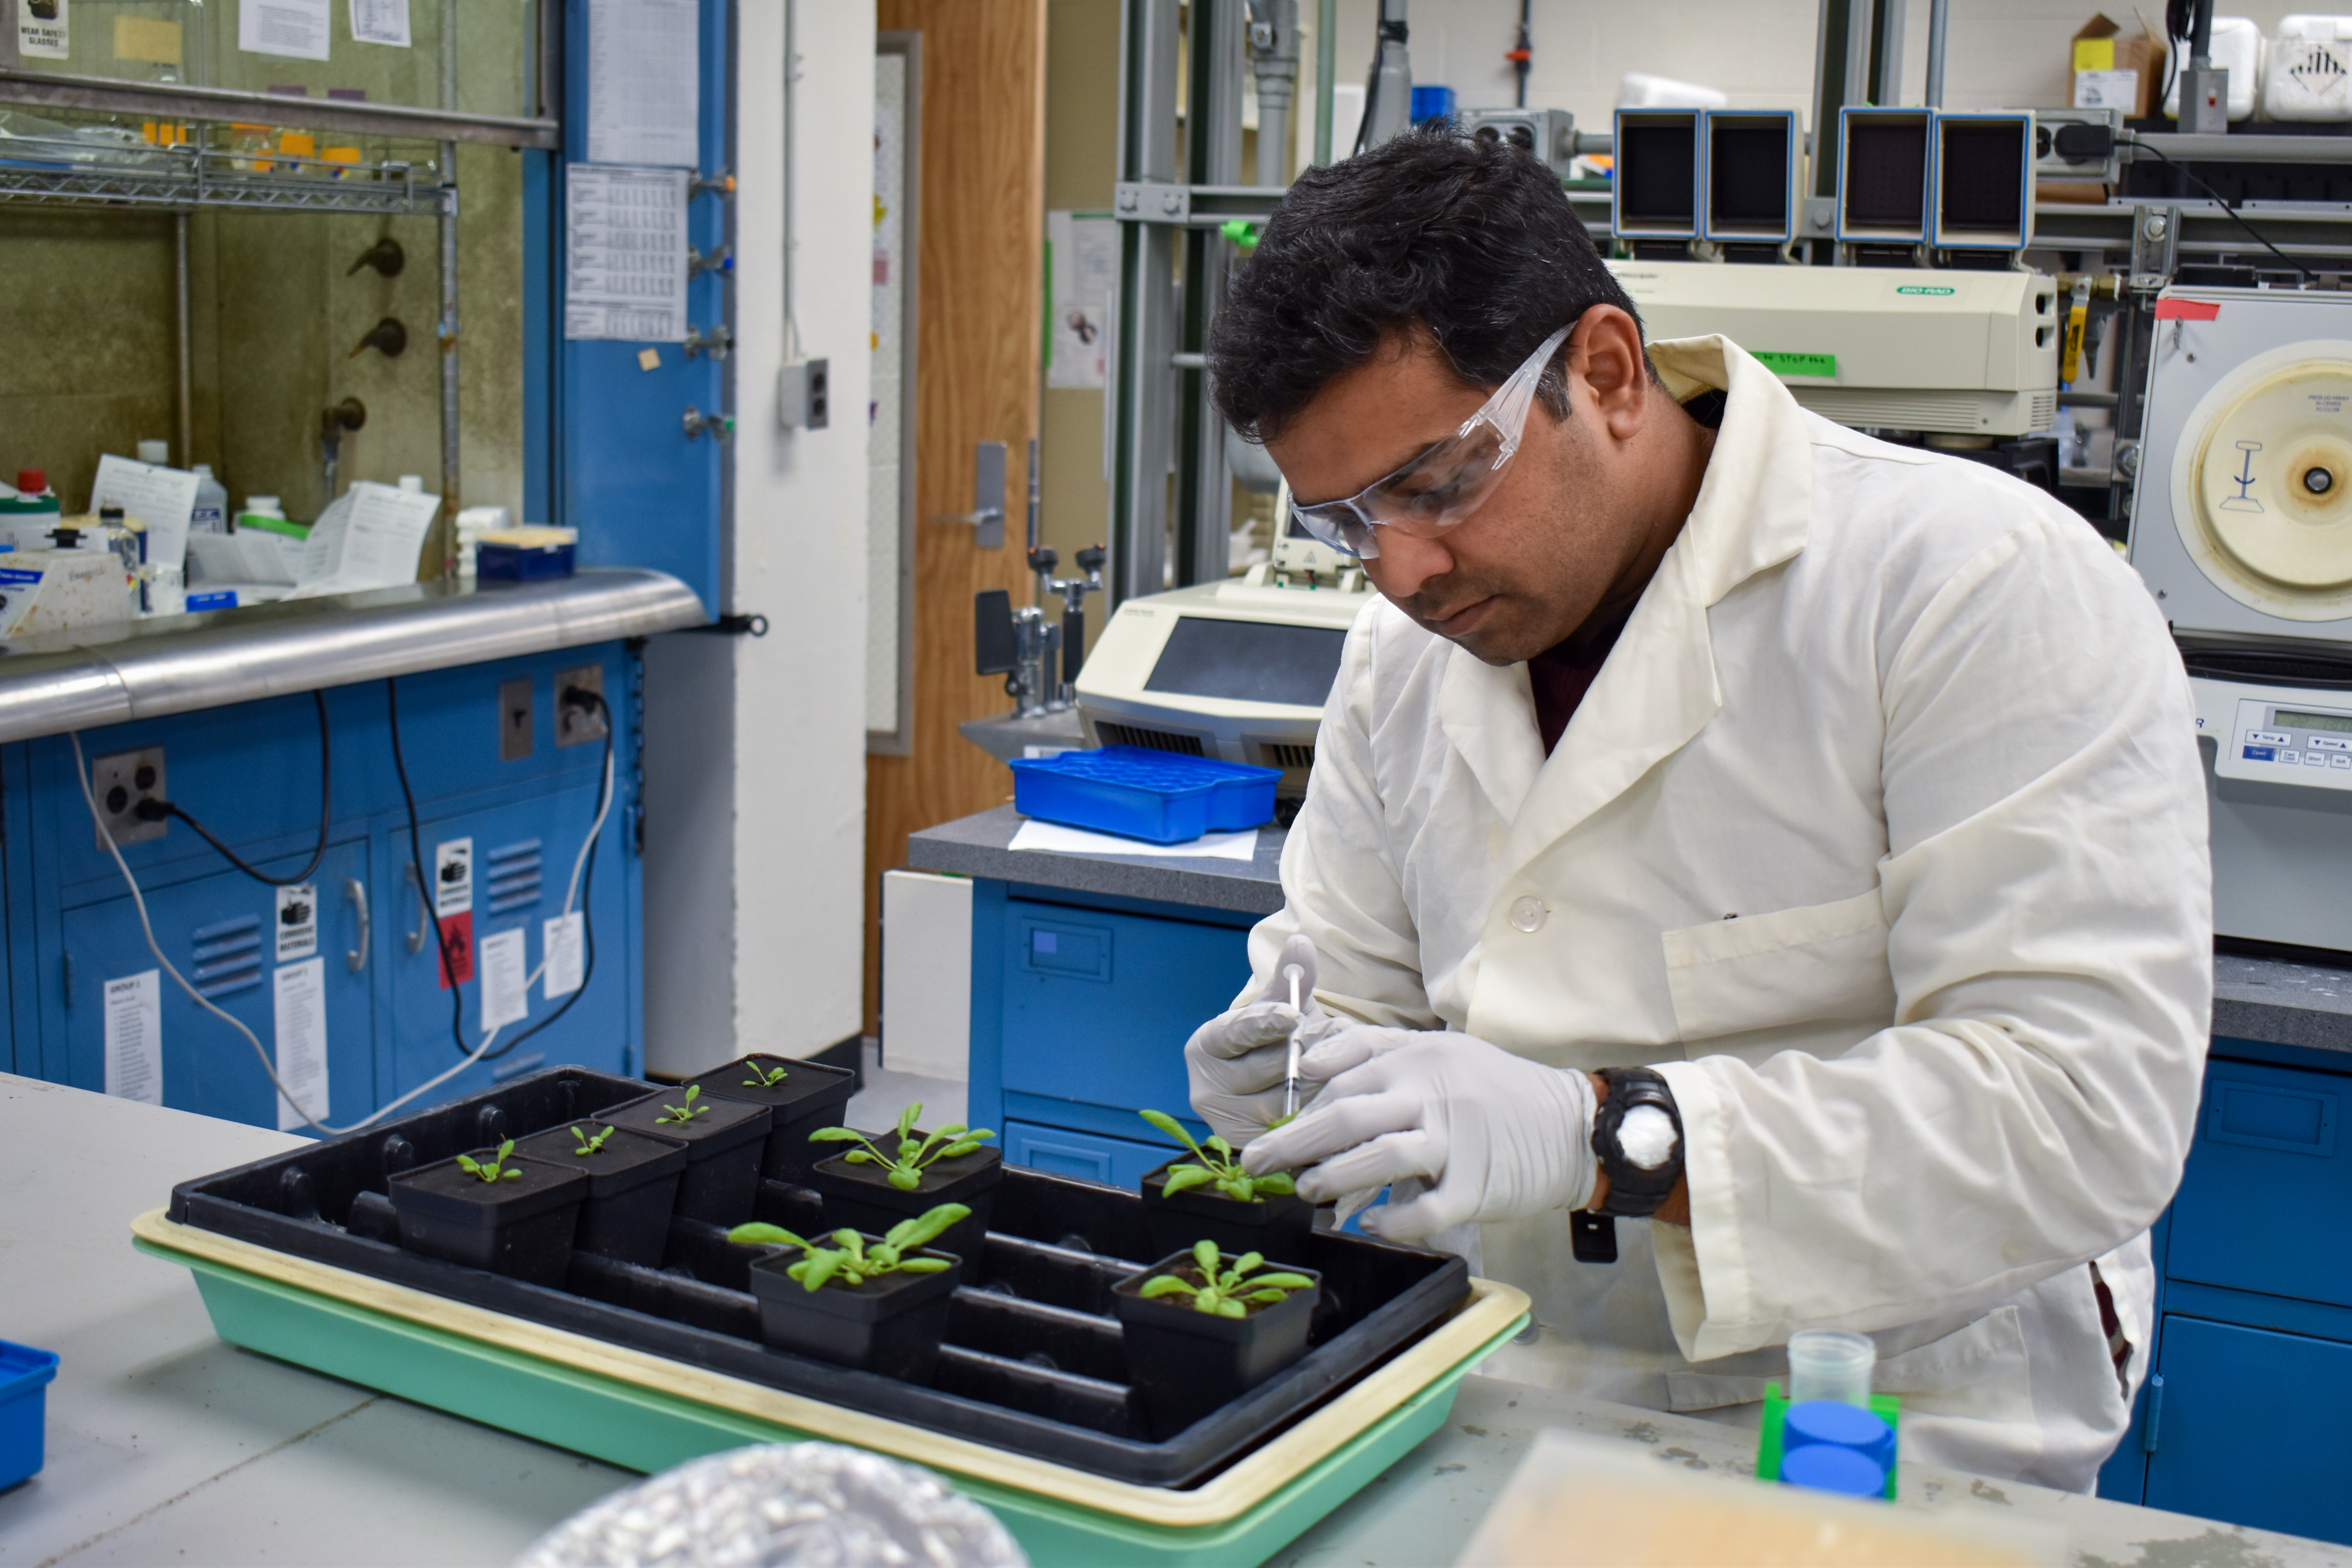 Wearing a lab coat, gloves and eye protection, postdoctoral researcher Deepak Bhandari uses a syringe to inject a green leaf on a small plant in a tray.